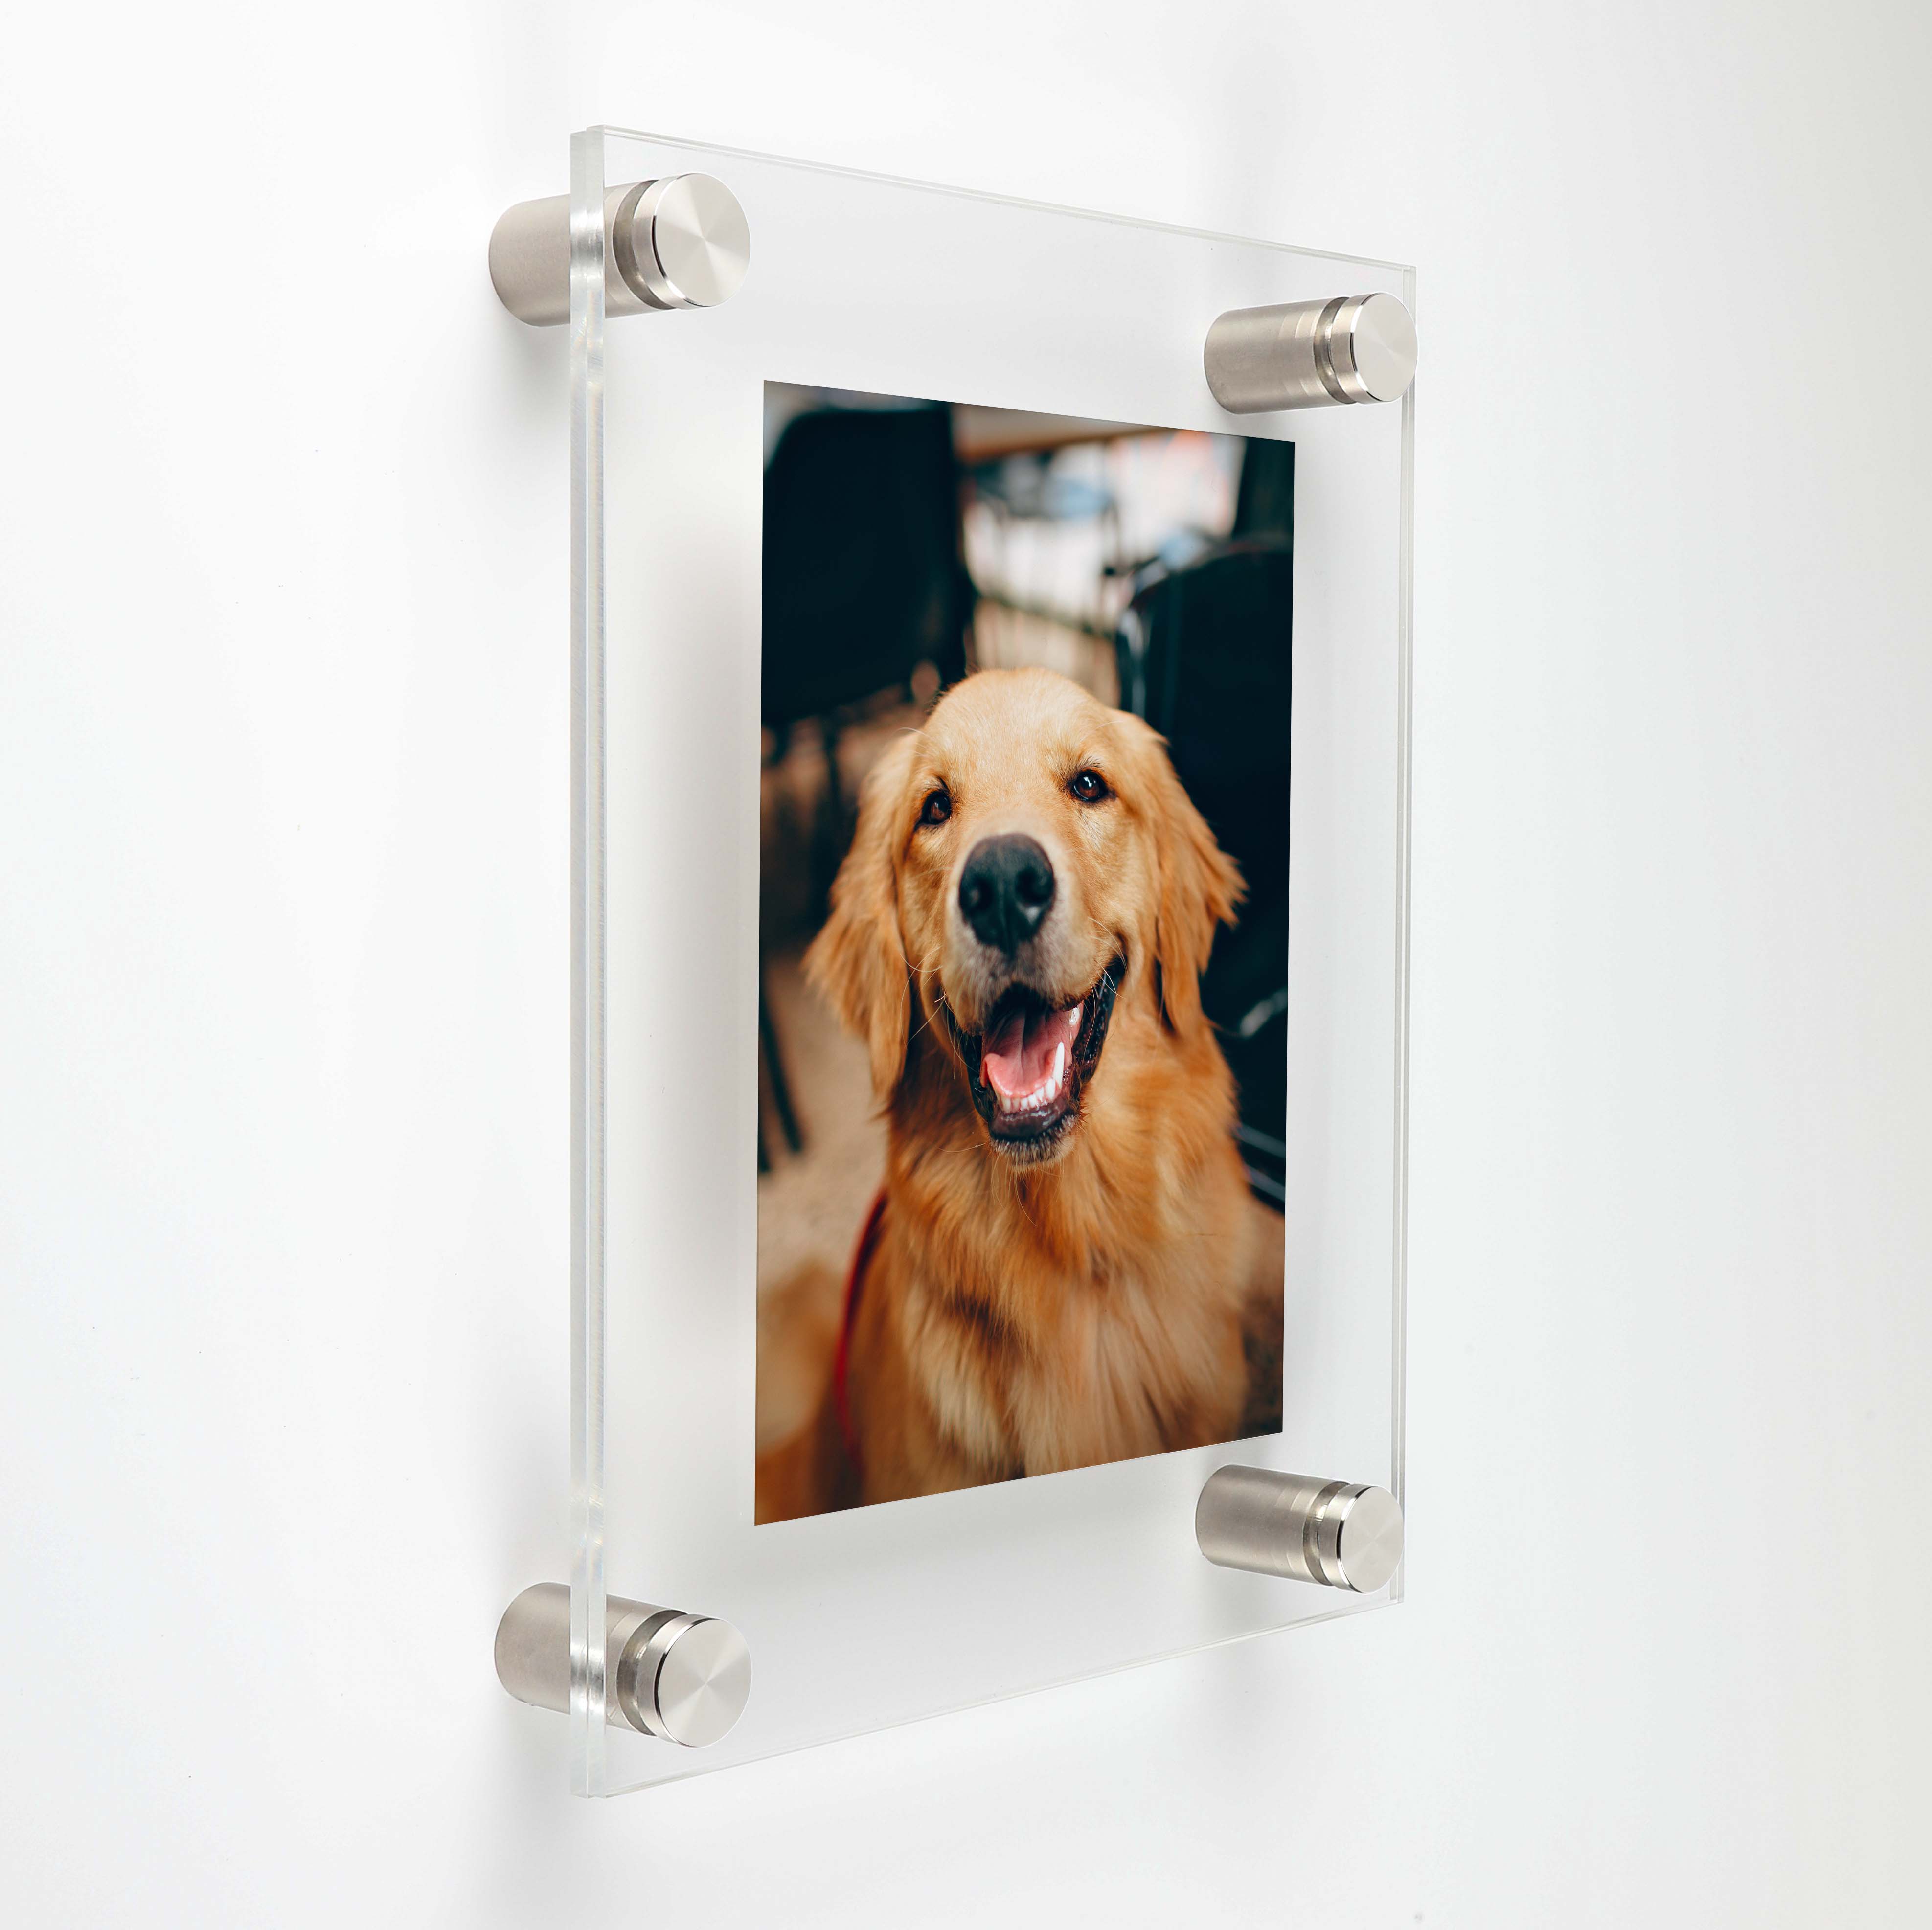 (2) 11'' x 13-1/2'' Clear Acrylics , Pre-Drilled With Polished Edges (Thick 1/8'' each), Wall Frame with (4) 3/4'' x 3/4'' Brushed Stainless Steel Standoffs includes Screws and Anchors